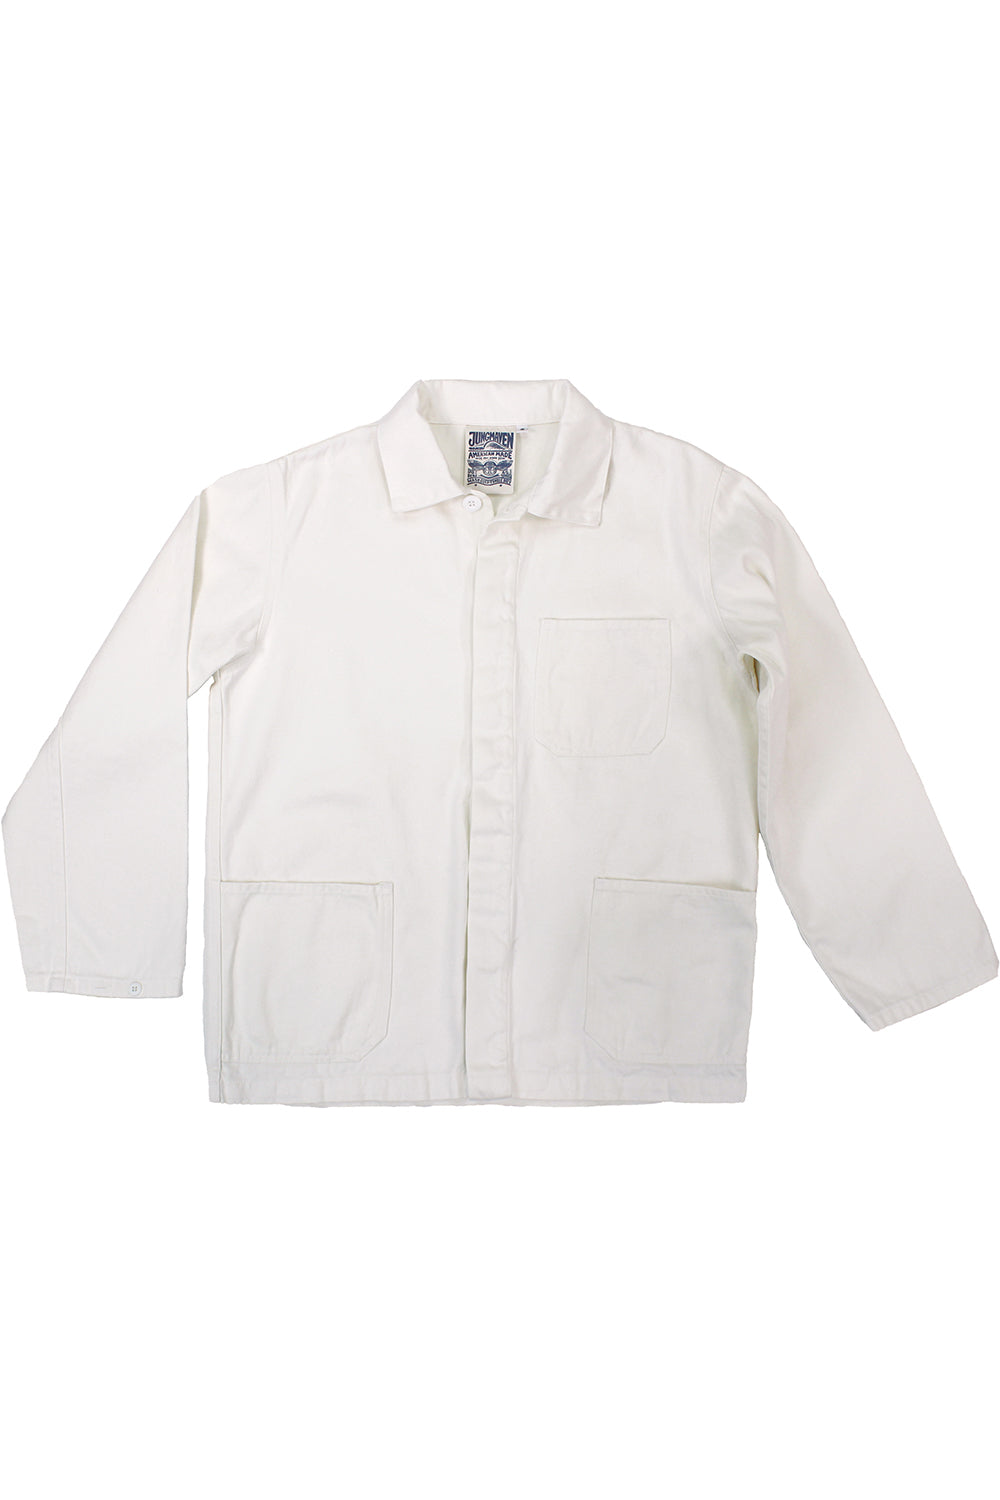 Olympic Jacket | Jungmaven Hemp Clothing & Accessories / Color: Washed White